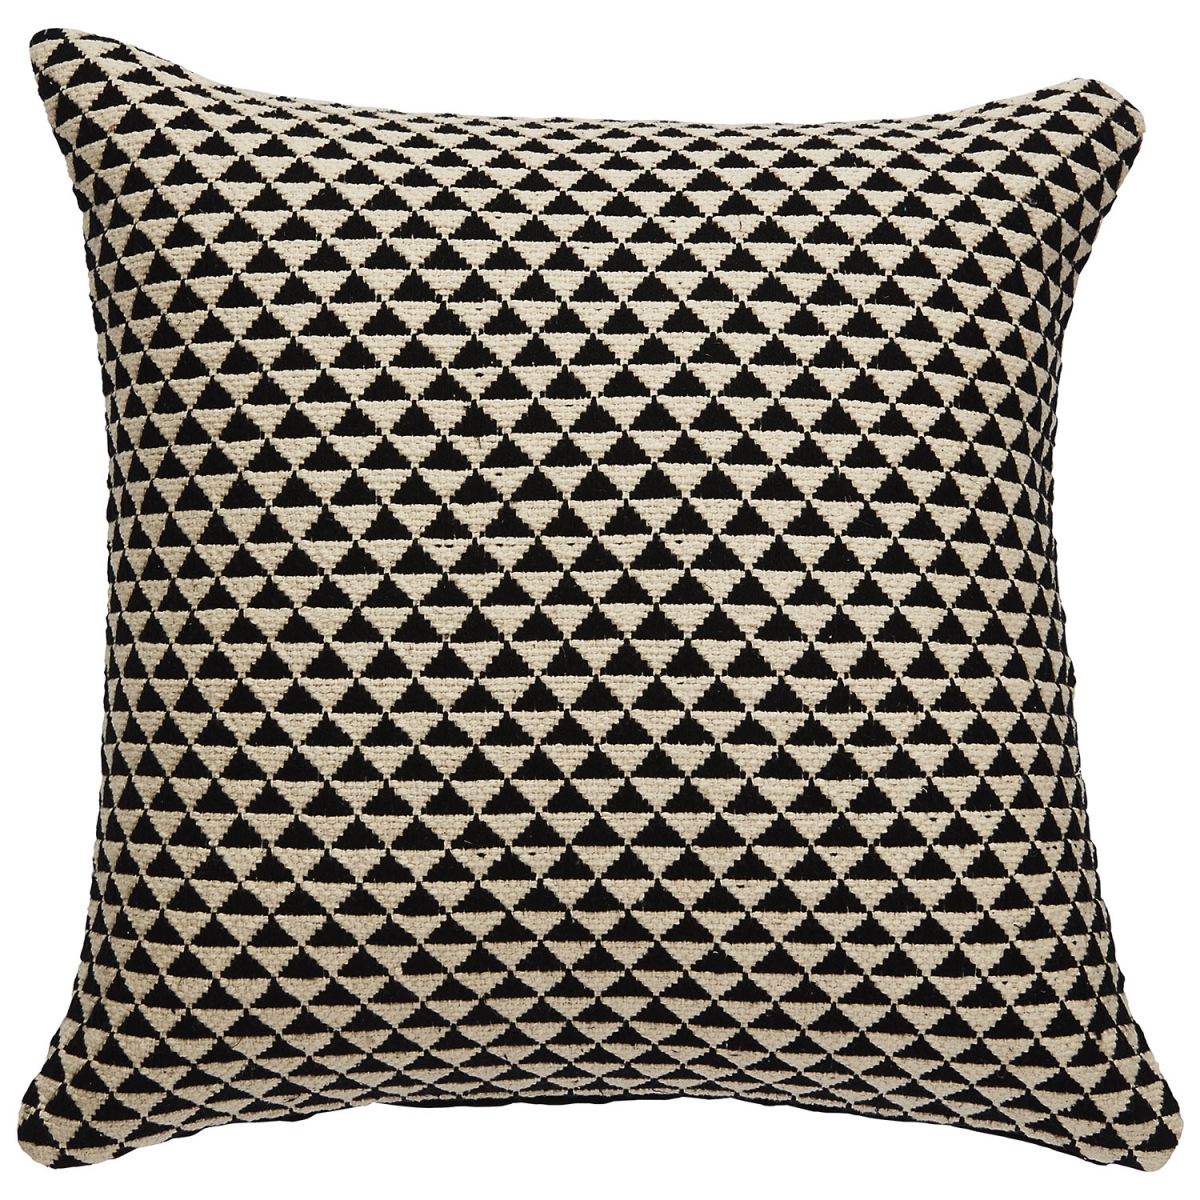 Plc101615-d National Geographic Home Collection Ng-24 Design Square Pillow, Caviar - 20 X 20 In.